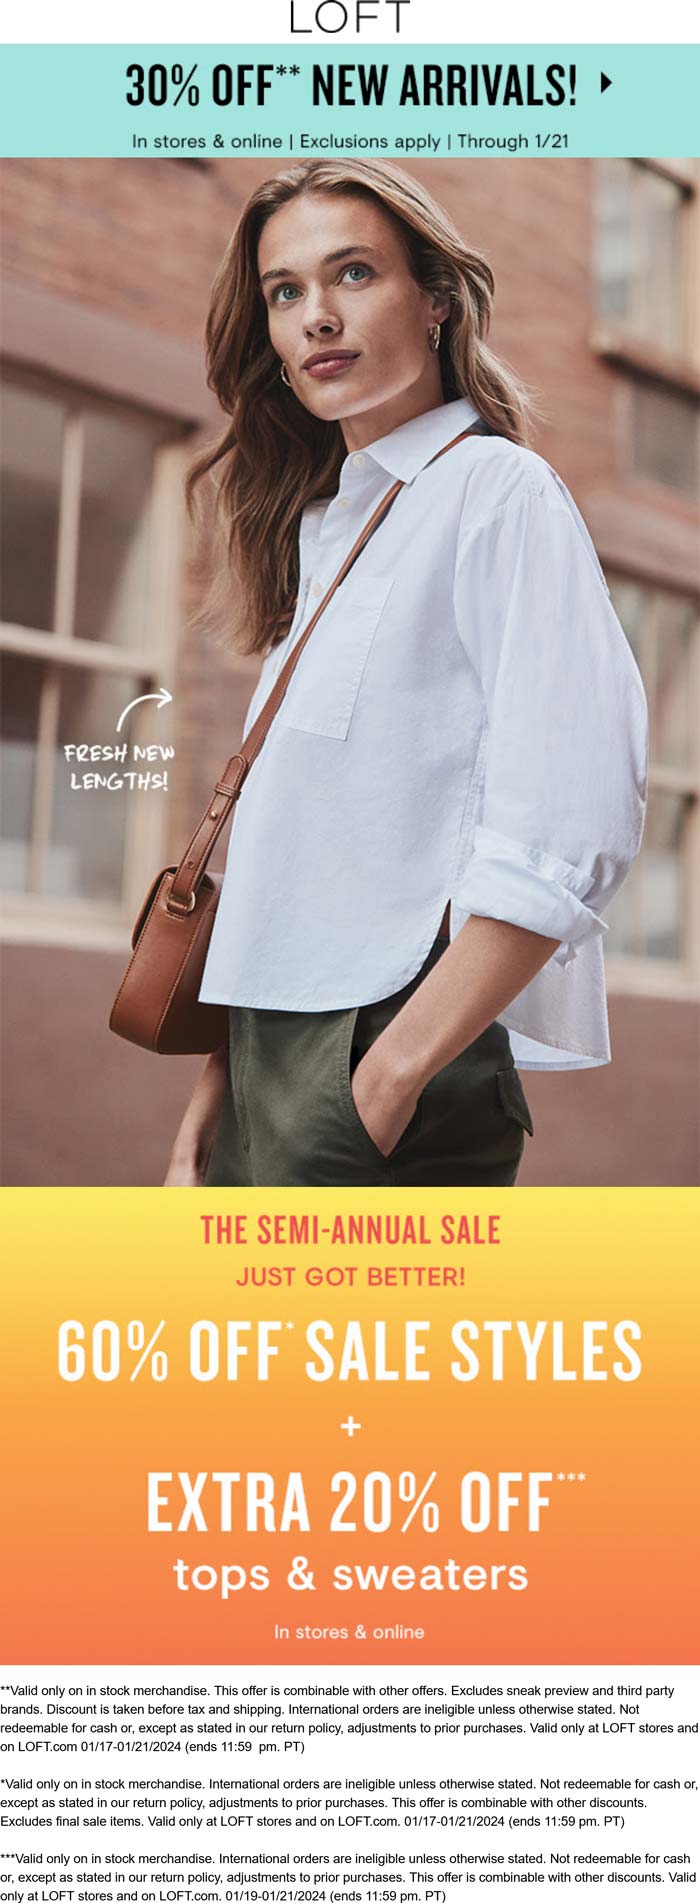 Extra 20% off tops & sweaters + 60% off sale styles at LOFT, ditto online #loft